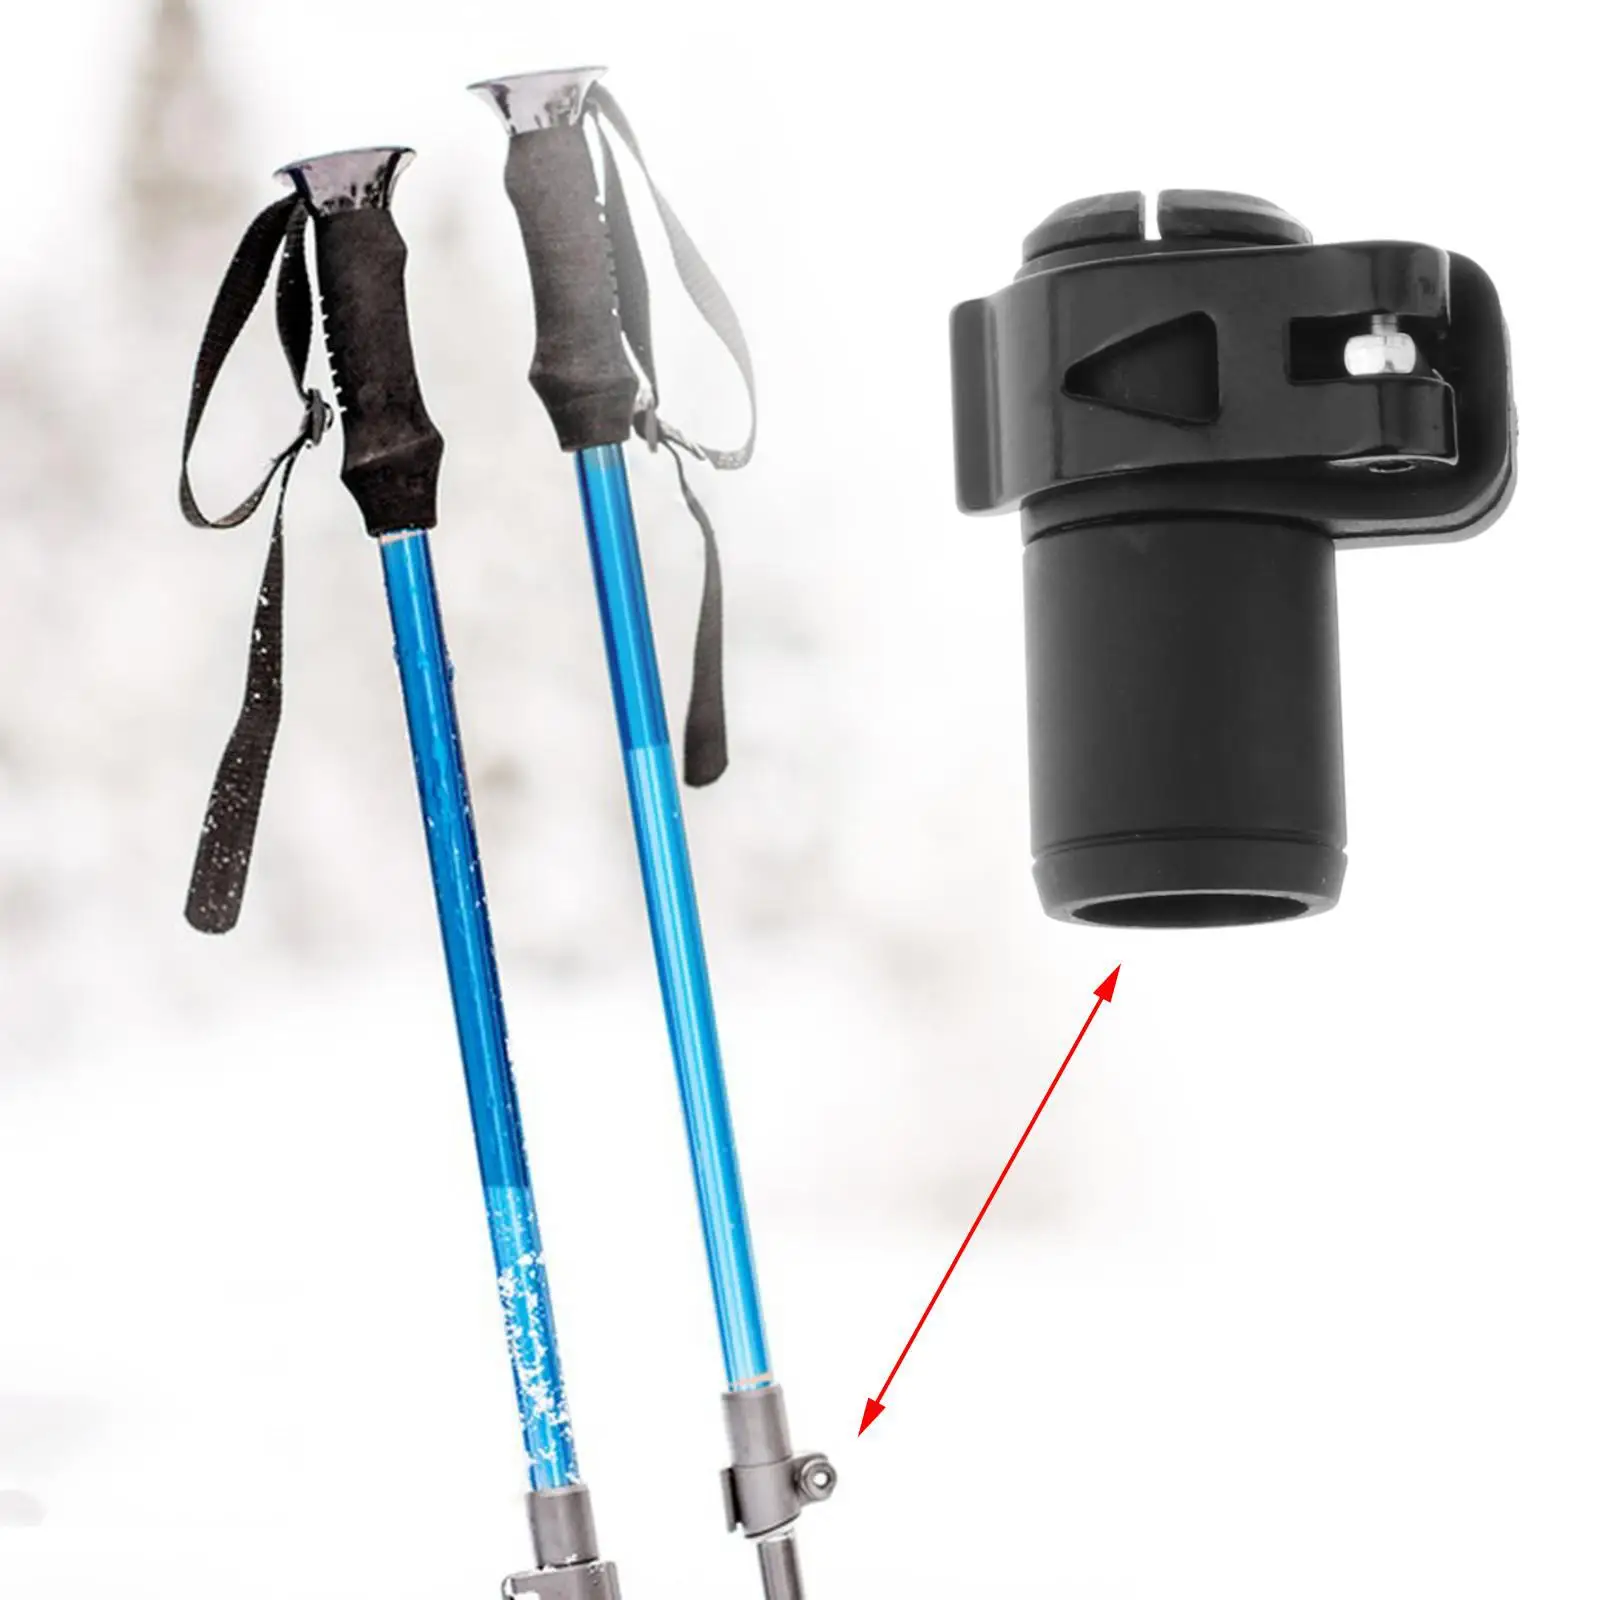 Walking Hiking Pole Accessories, Universal Quick Lock Durable, Walking Pole for Outdoor, Mountaineering